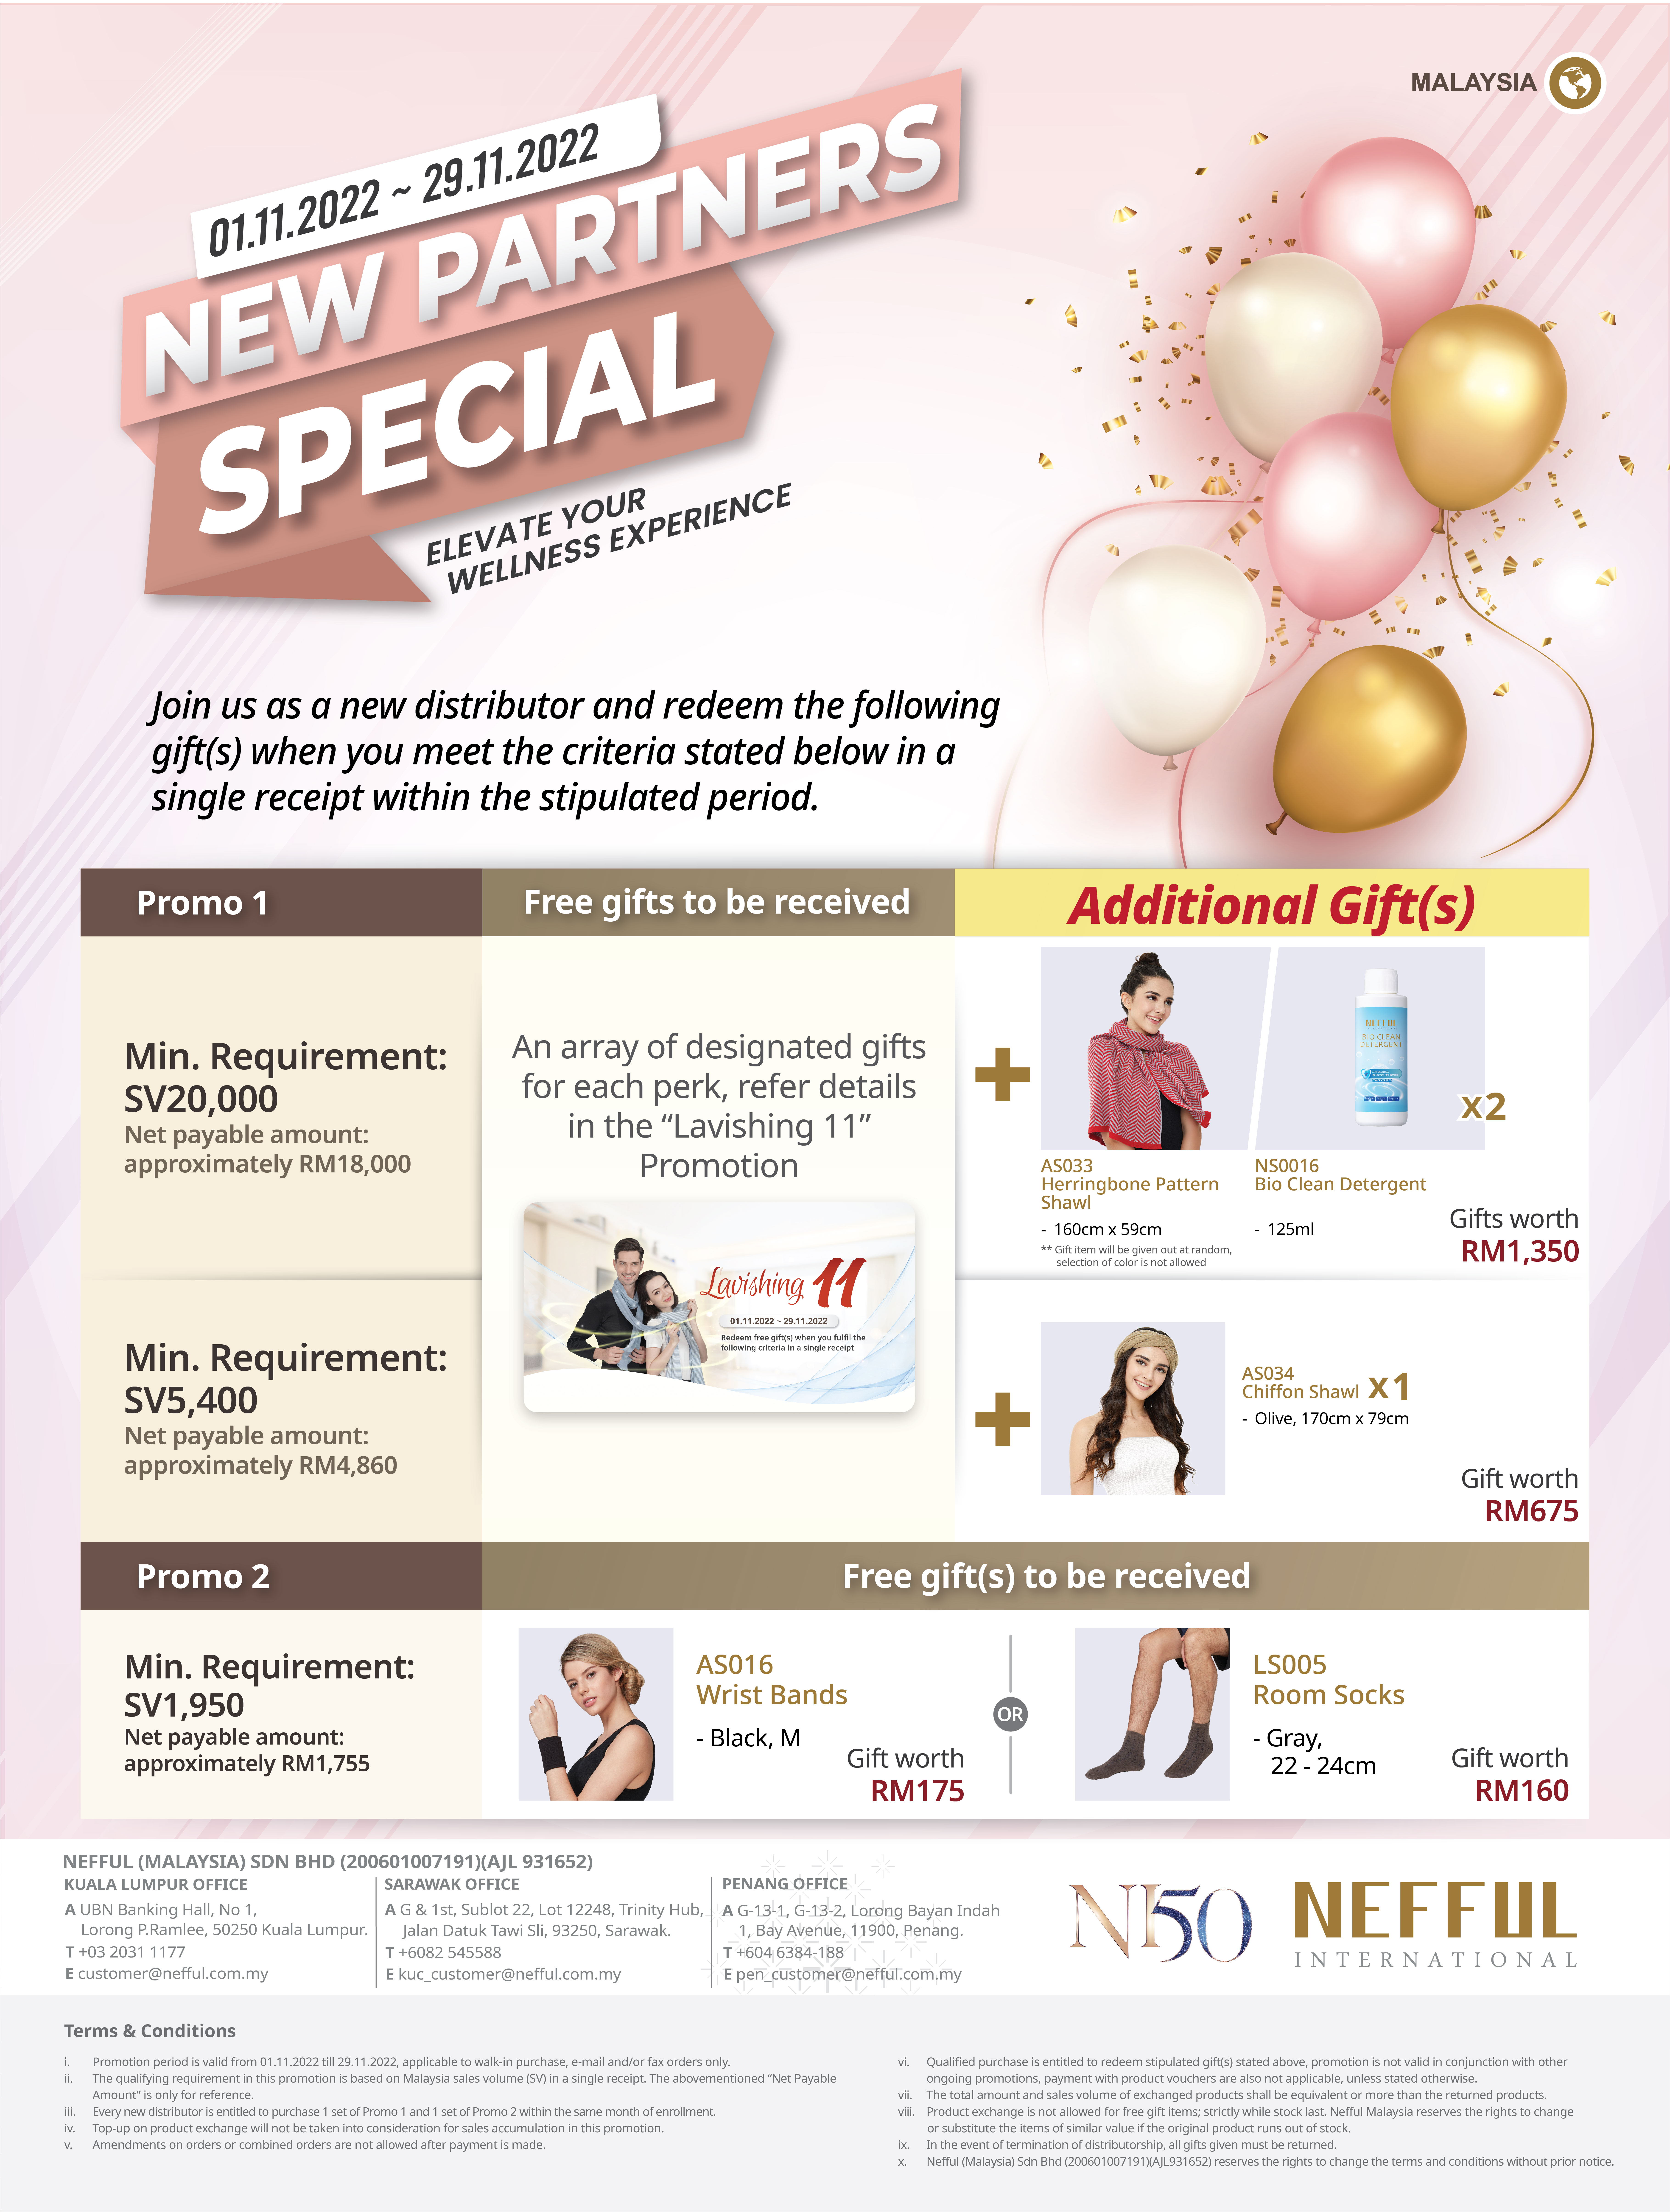 NFMY_November New Partners Special 22 FA_1